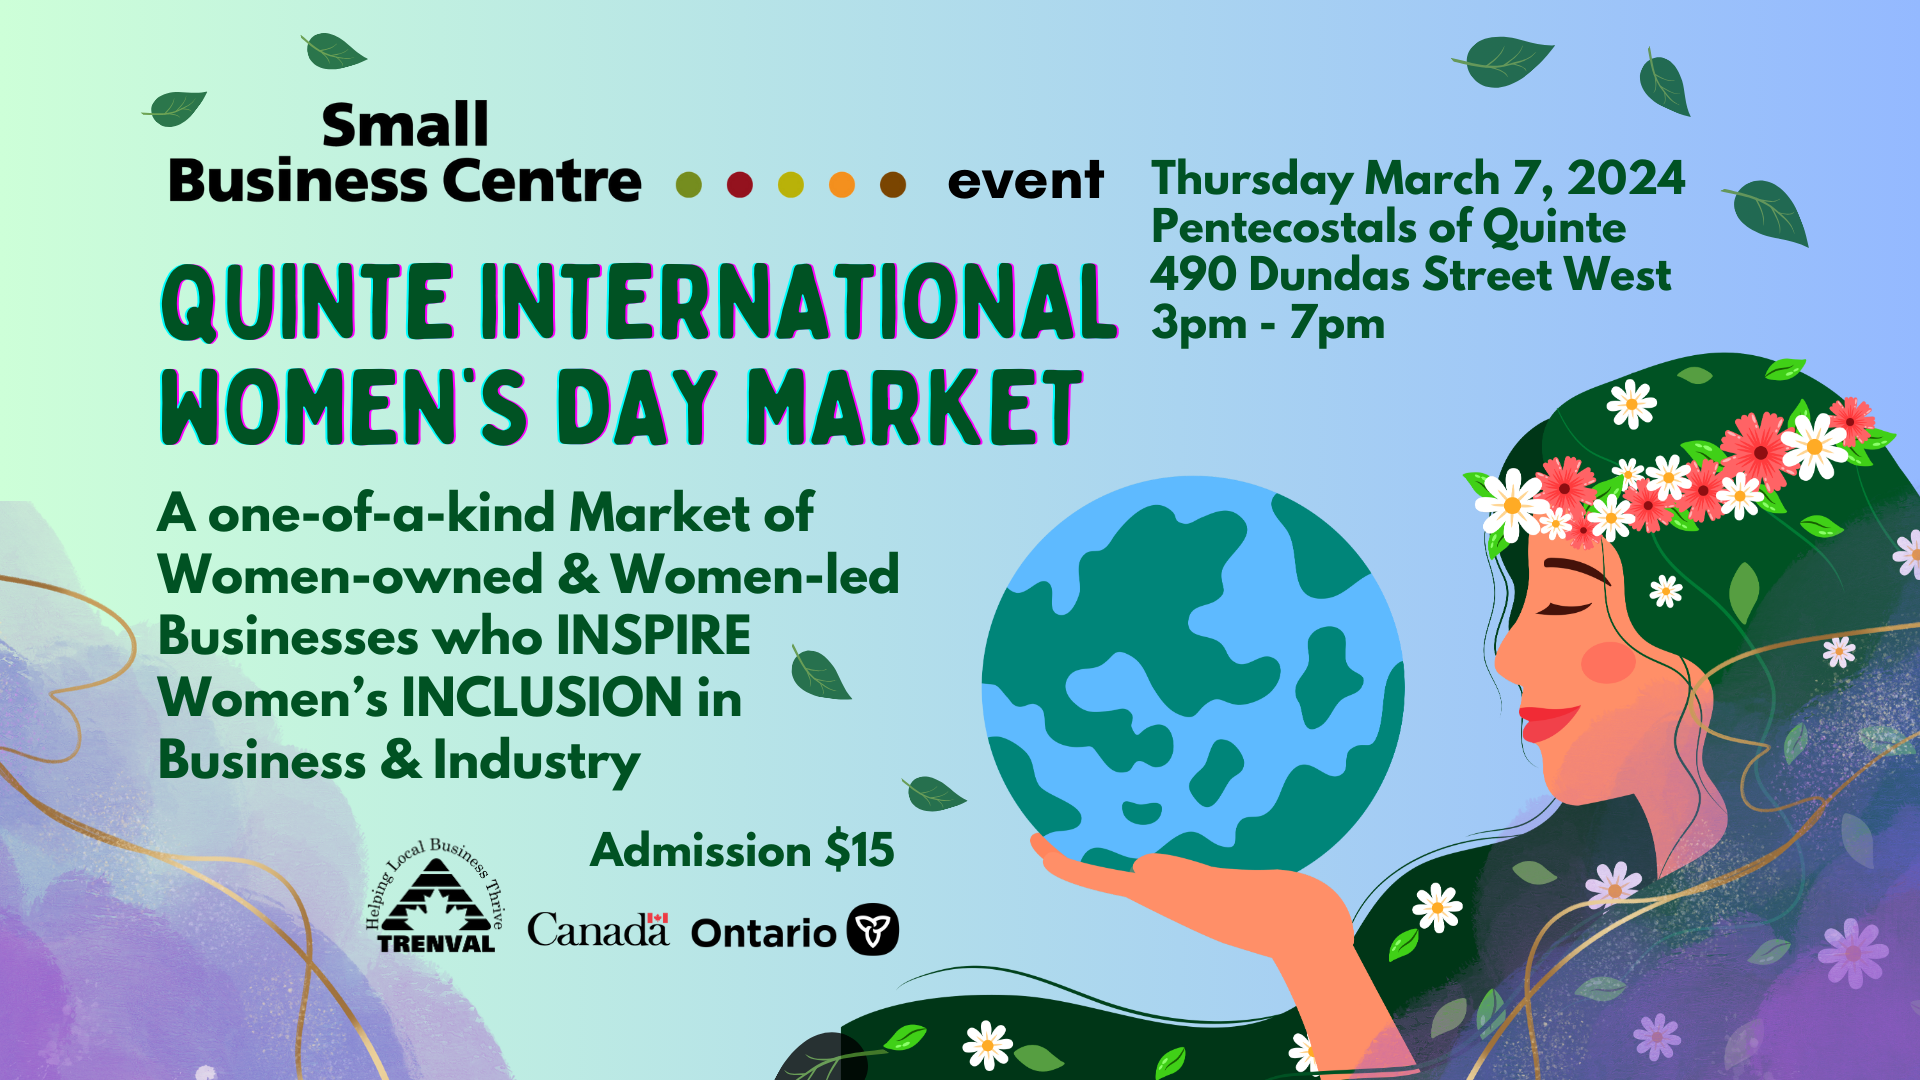 event poster titled "Quinte International Women's Day Market". Has drawing of a woman holding onto planet earth